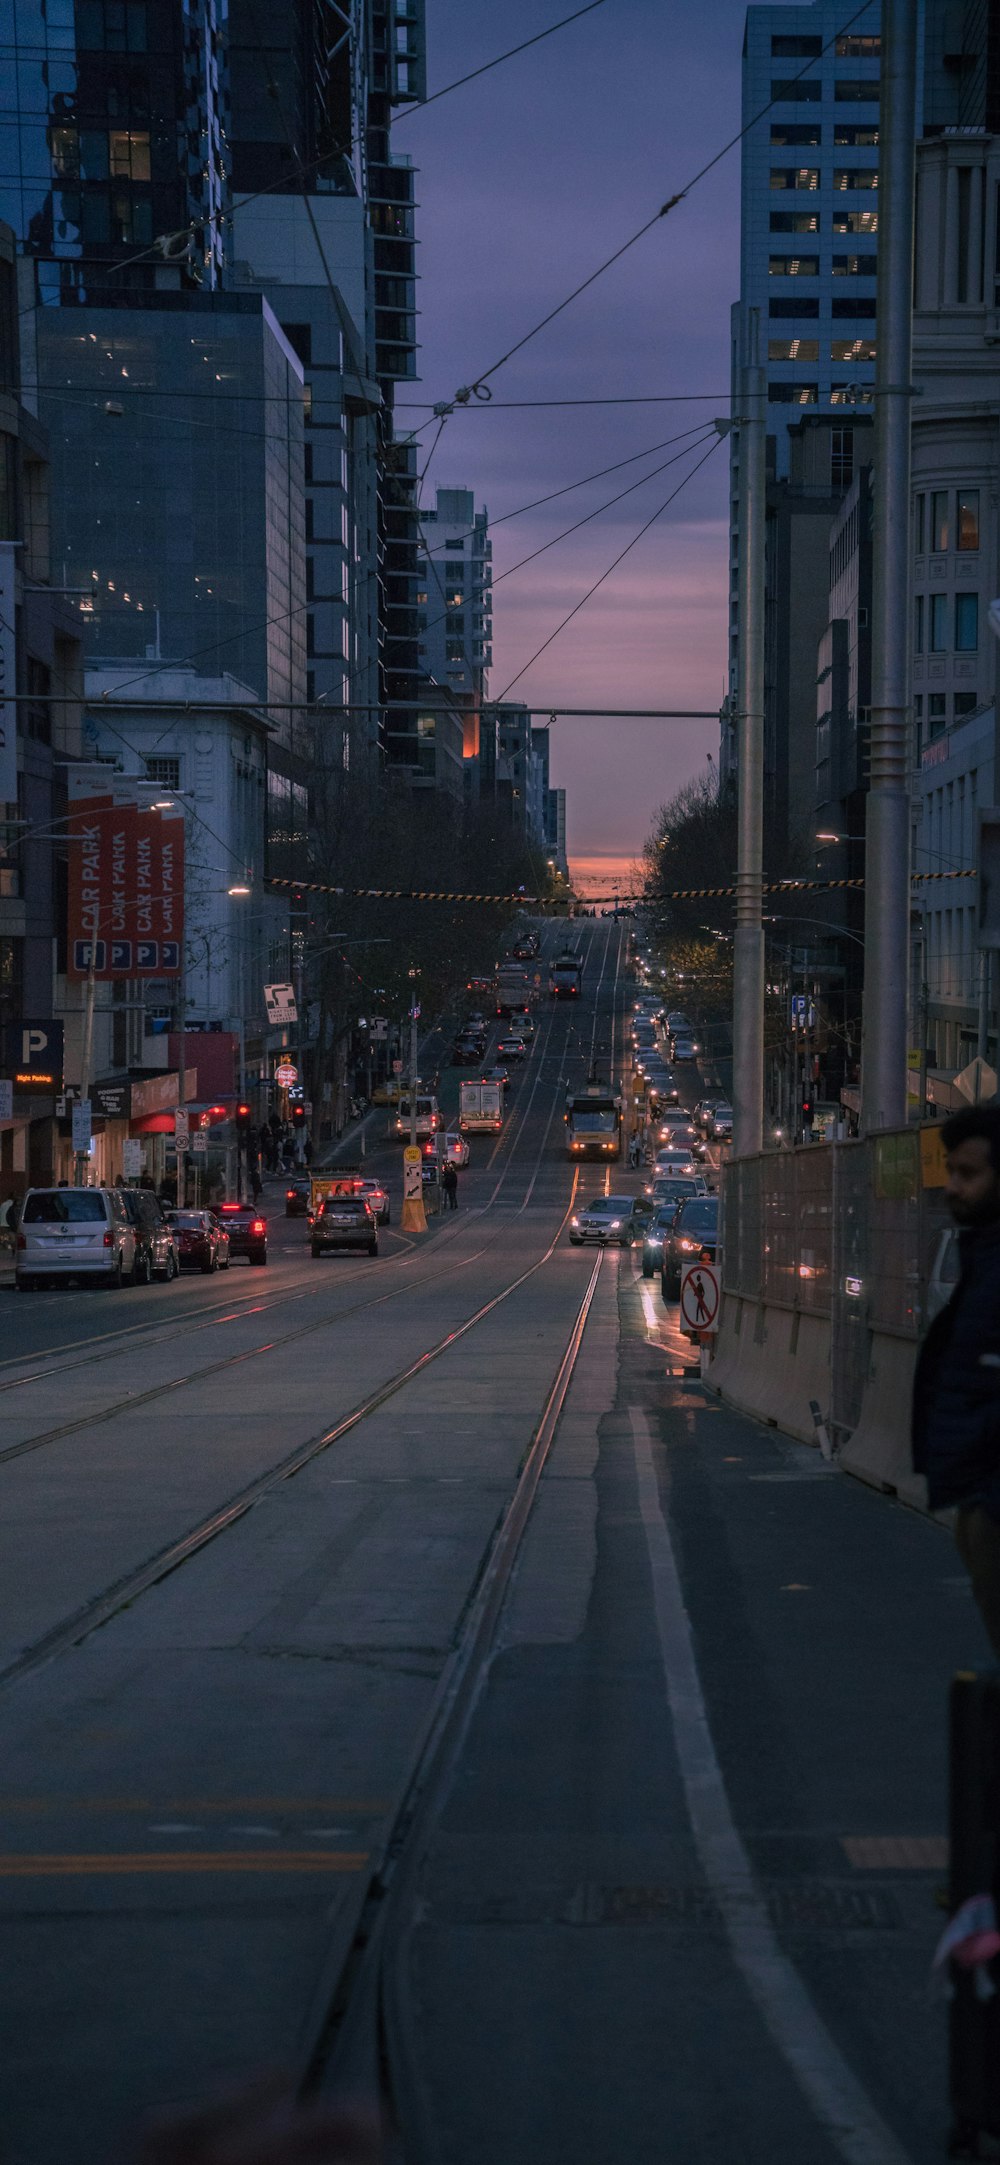 a city street at dusk with a train on the tracks